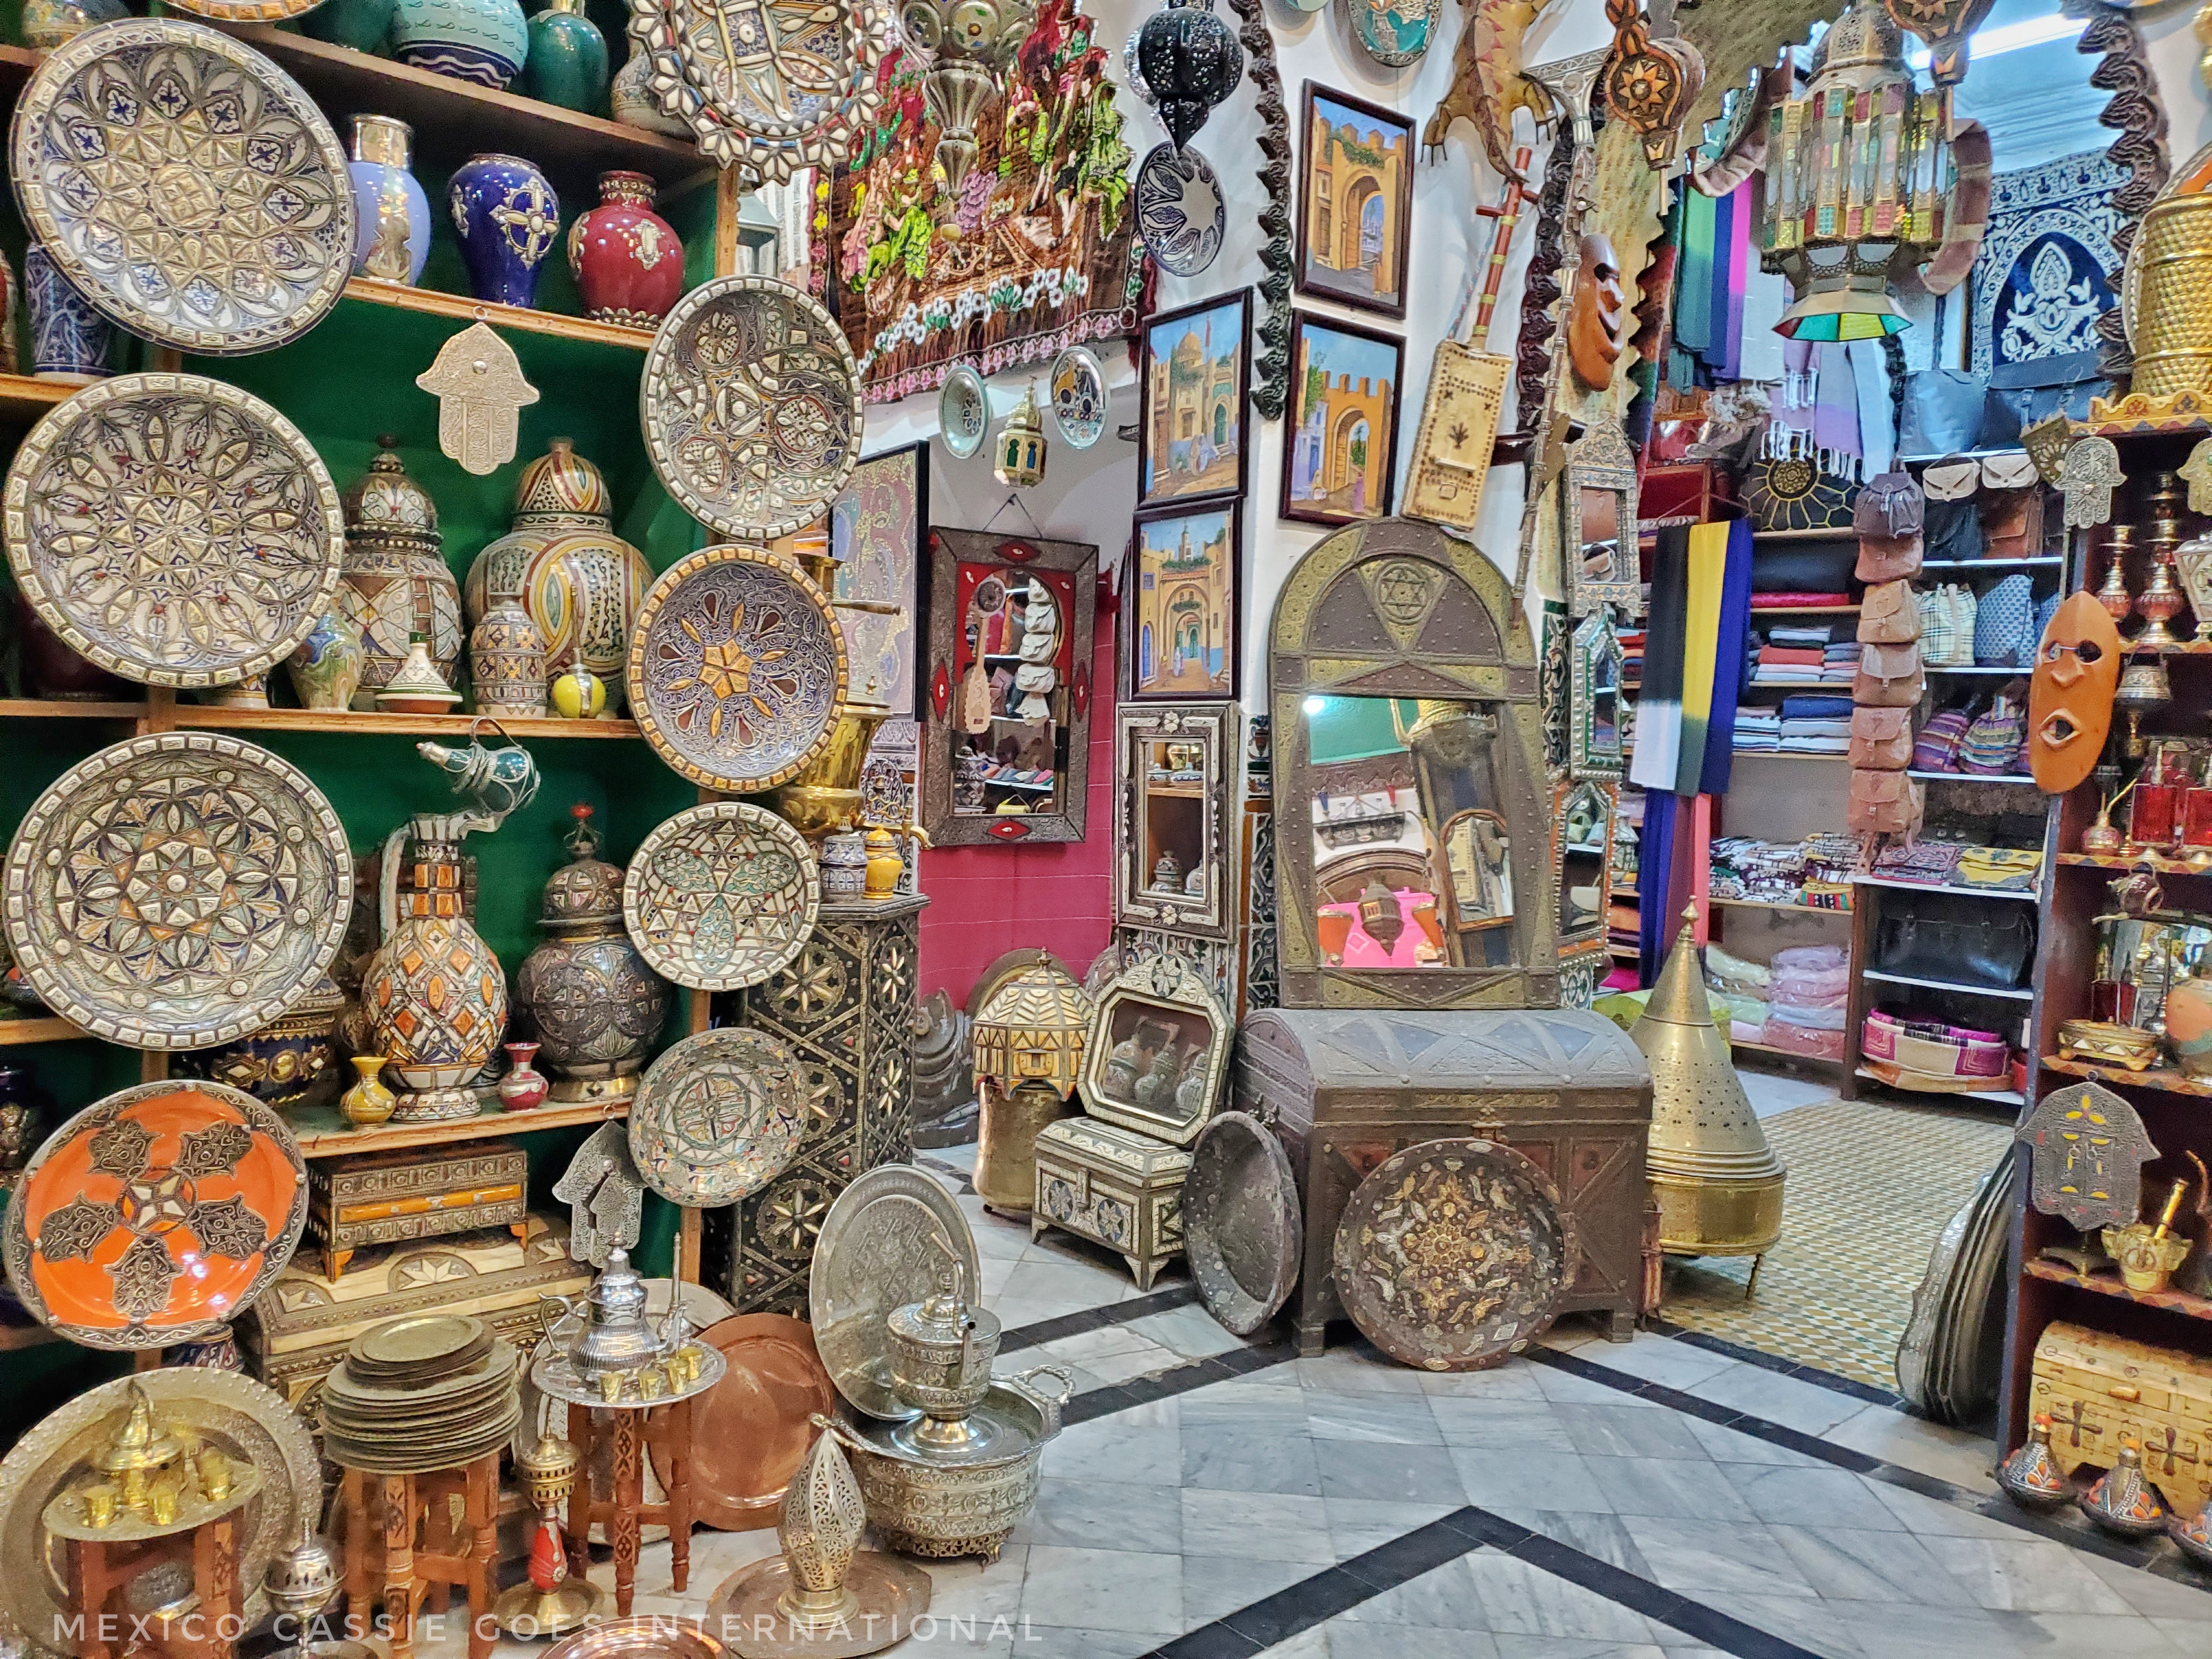 view inside Moroccan store - plates etc